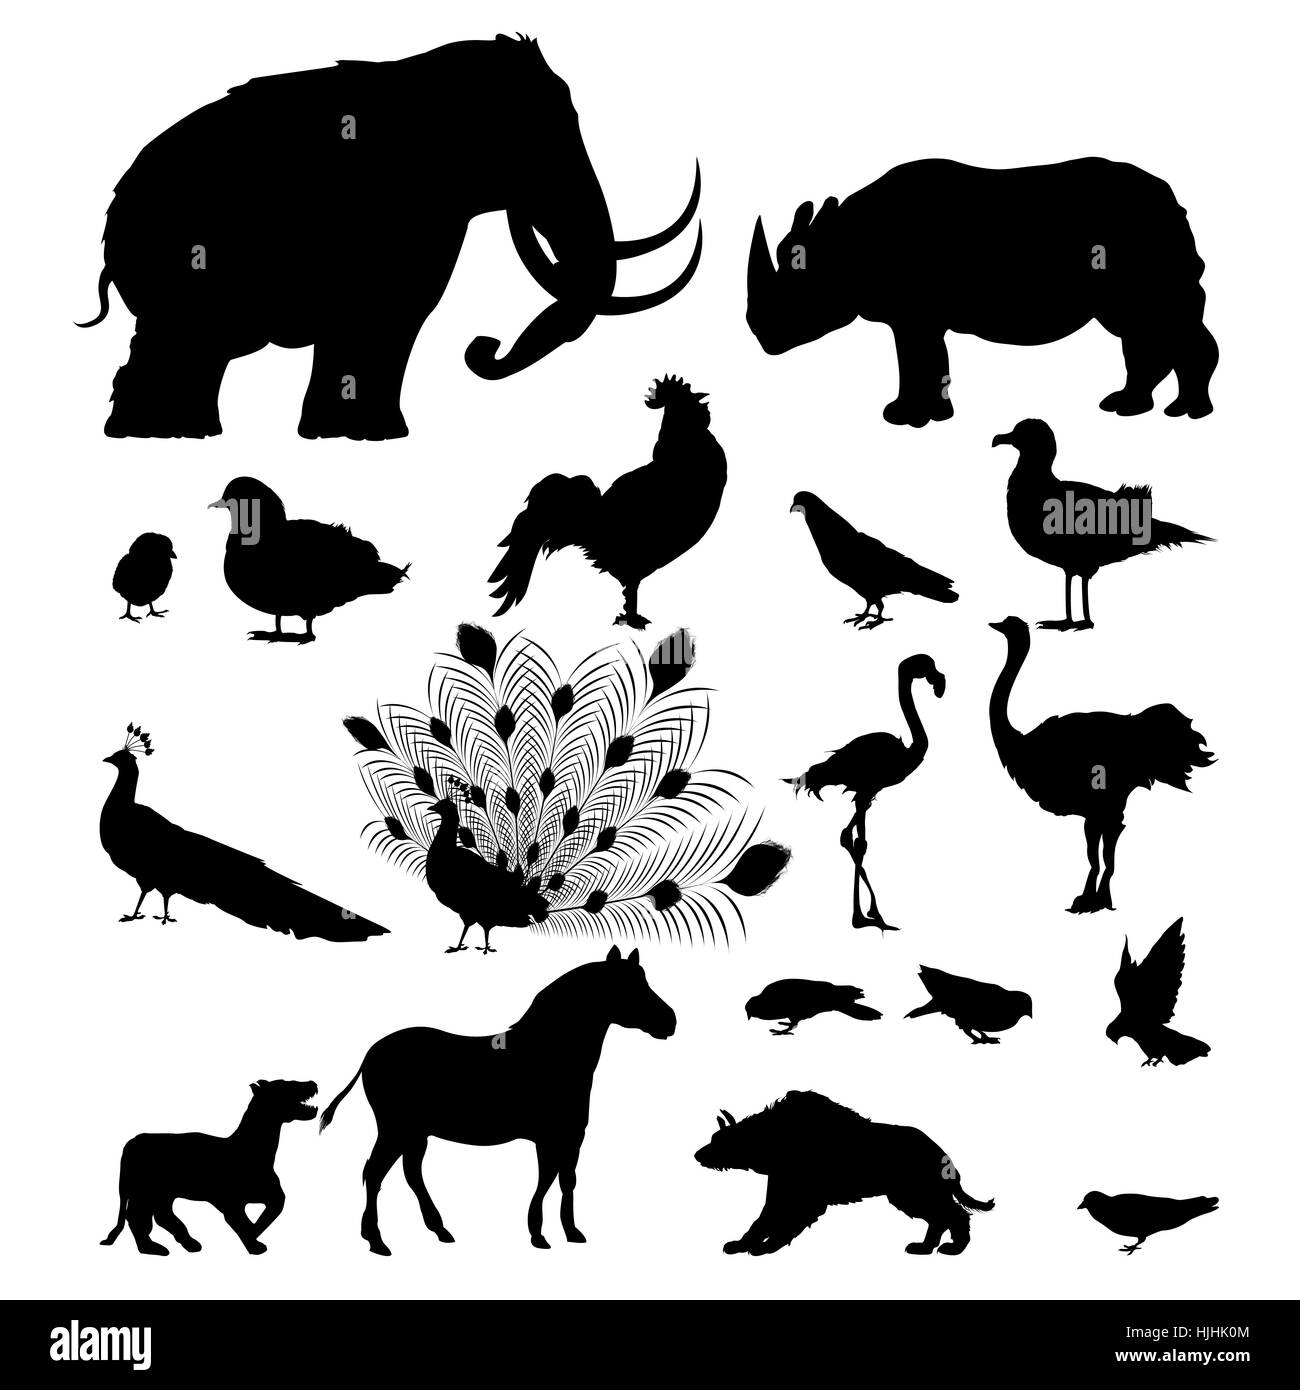 Large silhouette set of wild animals and birds over white background Stock Photo